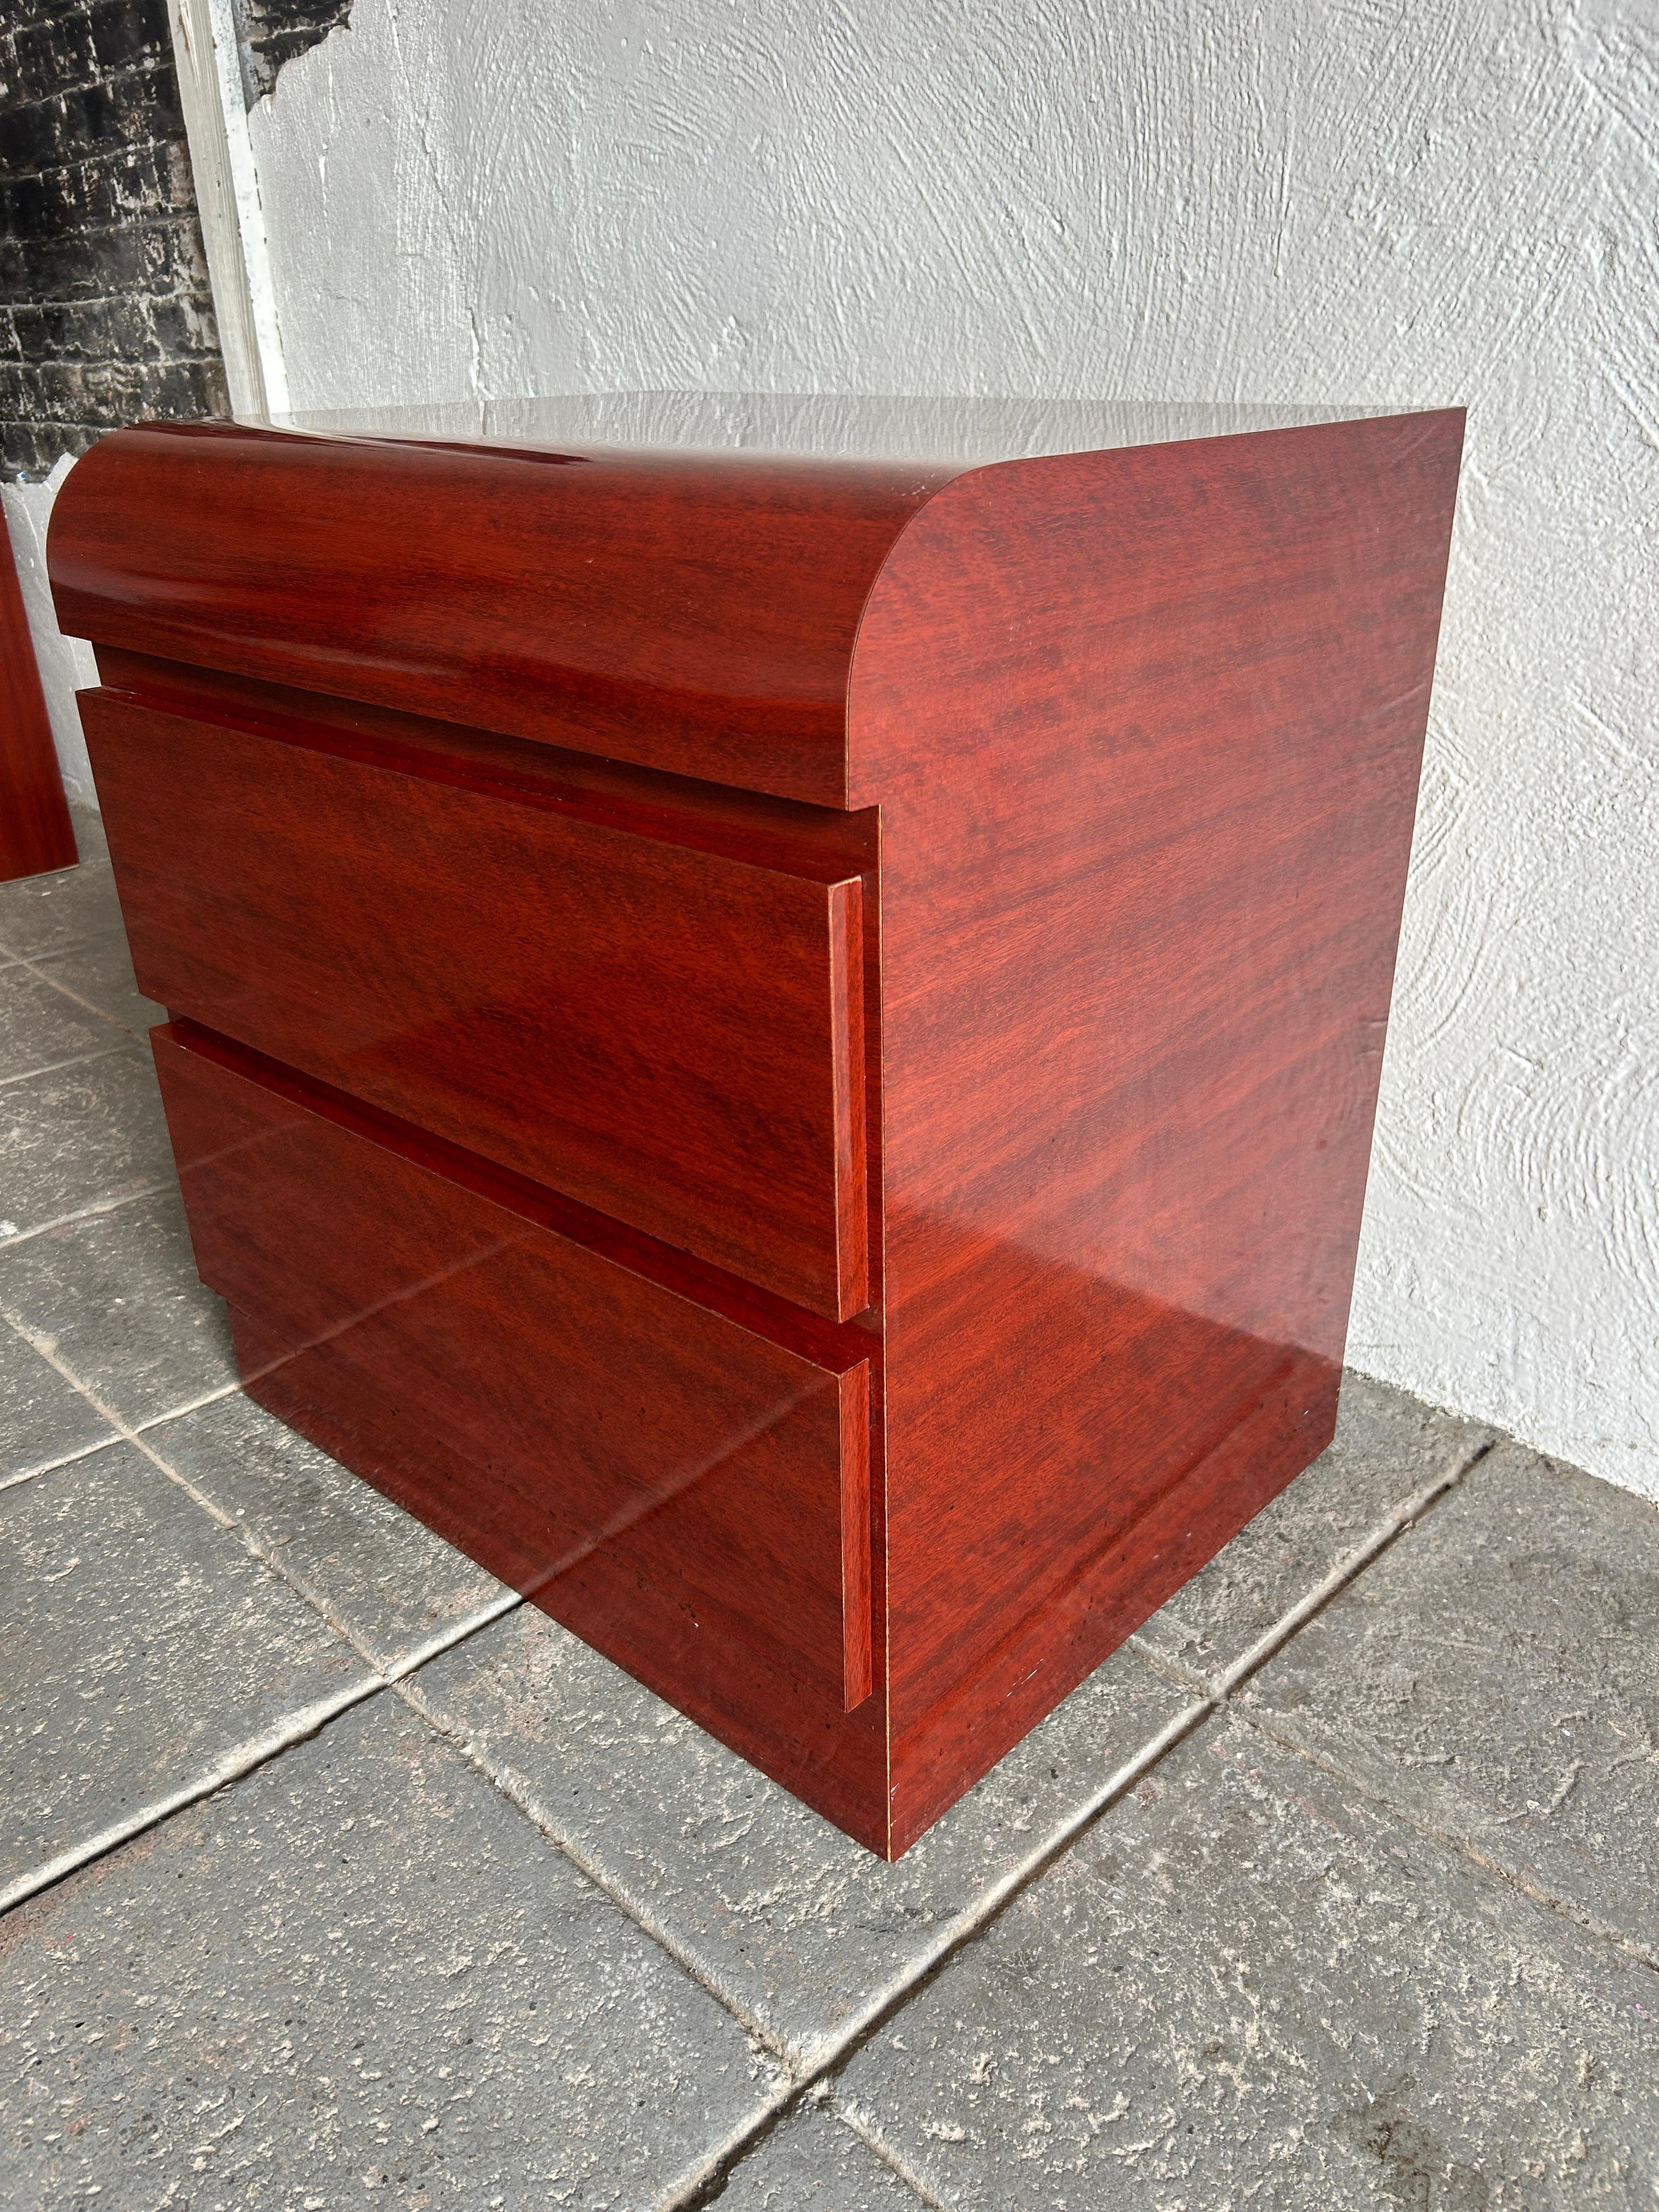 Beautiful post modern faux mahogany wood grain gloss laminate waterfall front 2 drawer nightstand, circa 1980. Very clean inside and out. Look at photos. all drawers have metal glides with stops. Great for home, office, art studio/gallery or retail